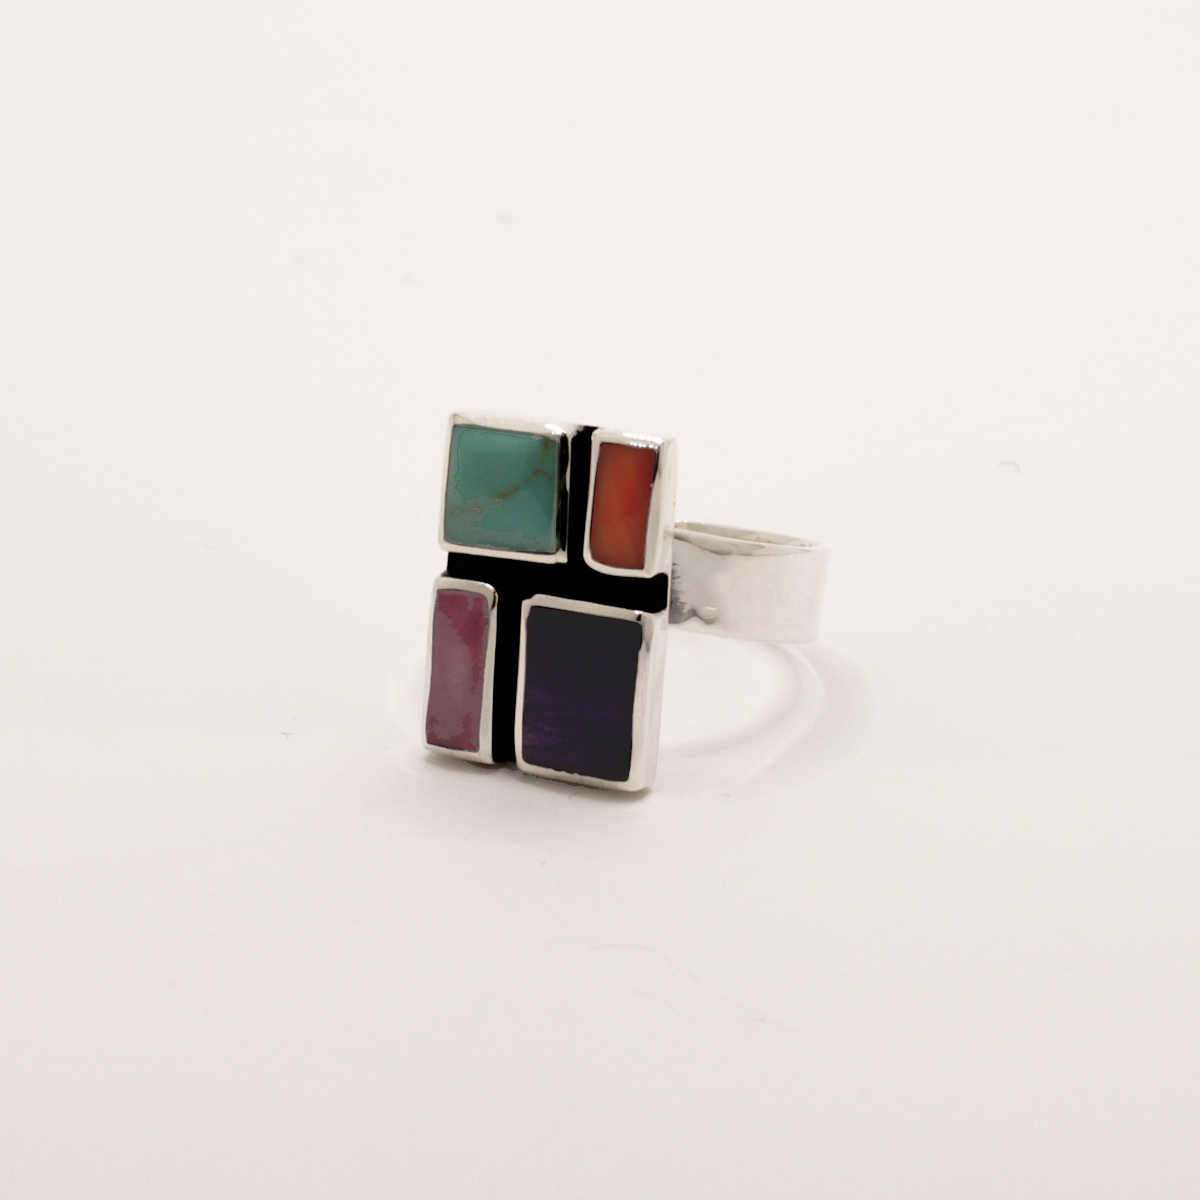 Sleveen's Rectangle With Multi-Coloured Mosaic Resin Adjustable Silver Ring is 13mm wide, 18mm long, 3mm deep, and 5mm wide on the silver band. Easily adjusted to fit sizes 7-10, this .925 silver piece is inspired by the vibrant hues of Kinsale's homes.